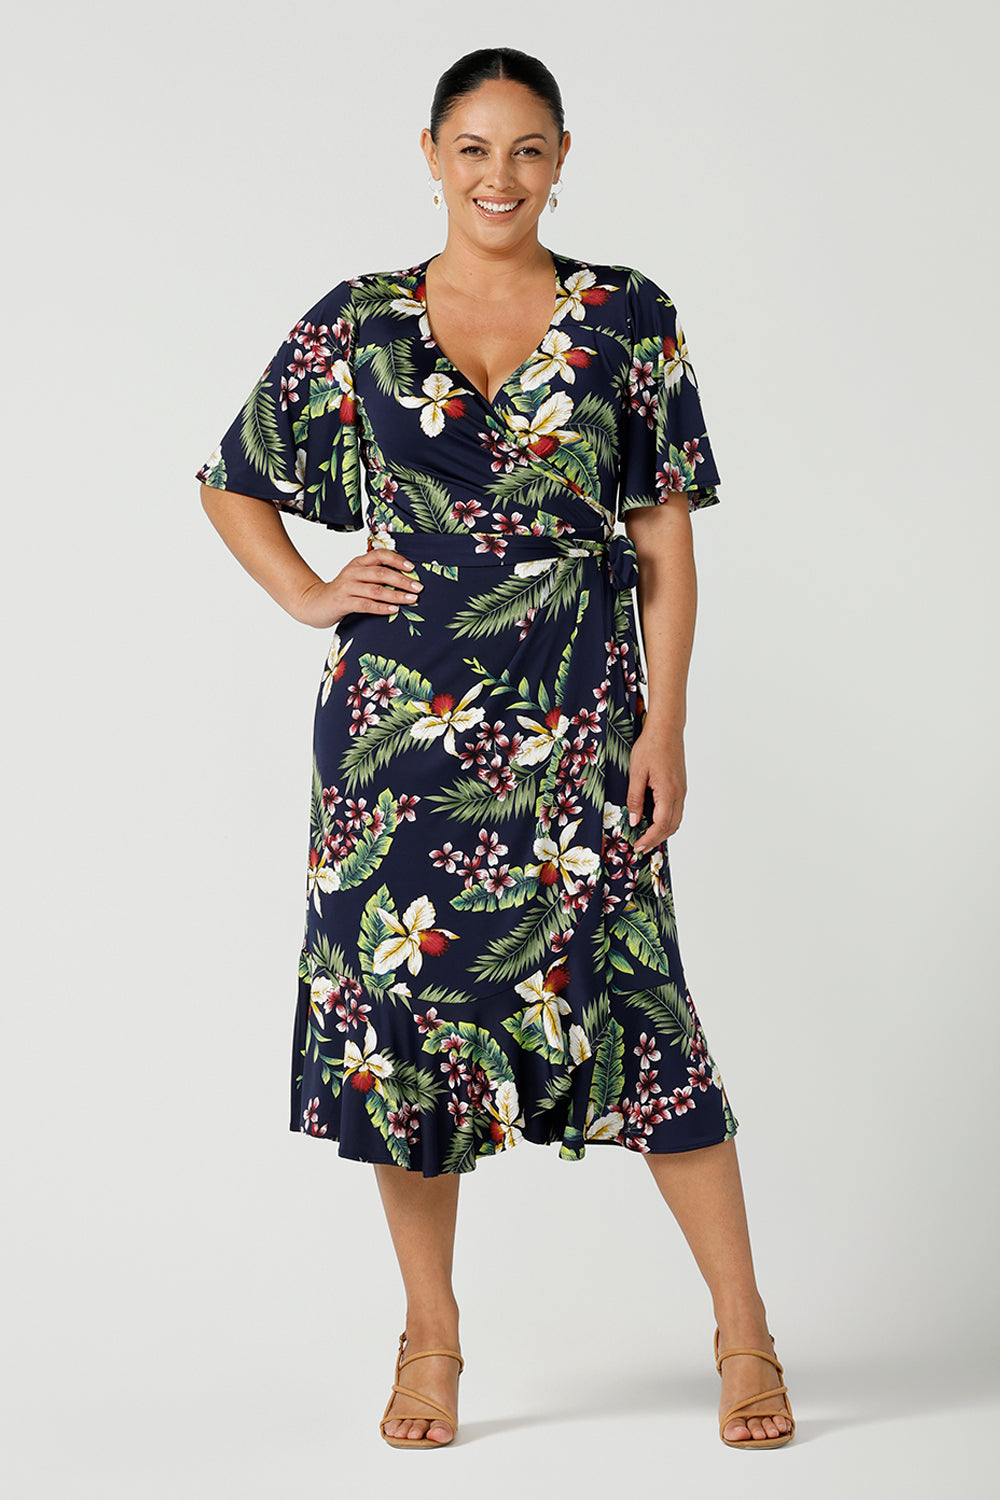 A curvy woman in a size 12 wears wrap dress for curvy women in festive Merriment Christmas tropical print. Jersey wrap dress in soft jersey fabric with frilly hem and sleeves. Made in Australia for sizes 8 - 24.